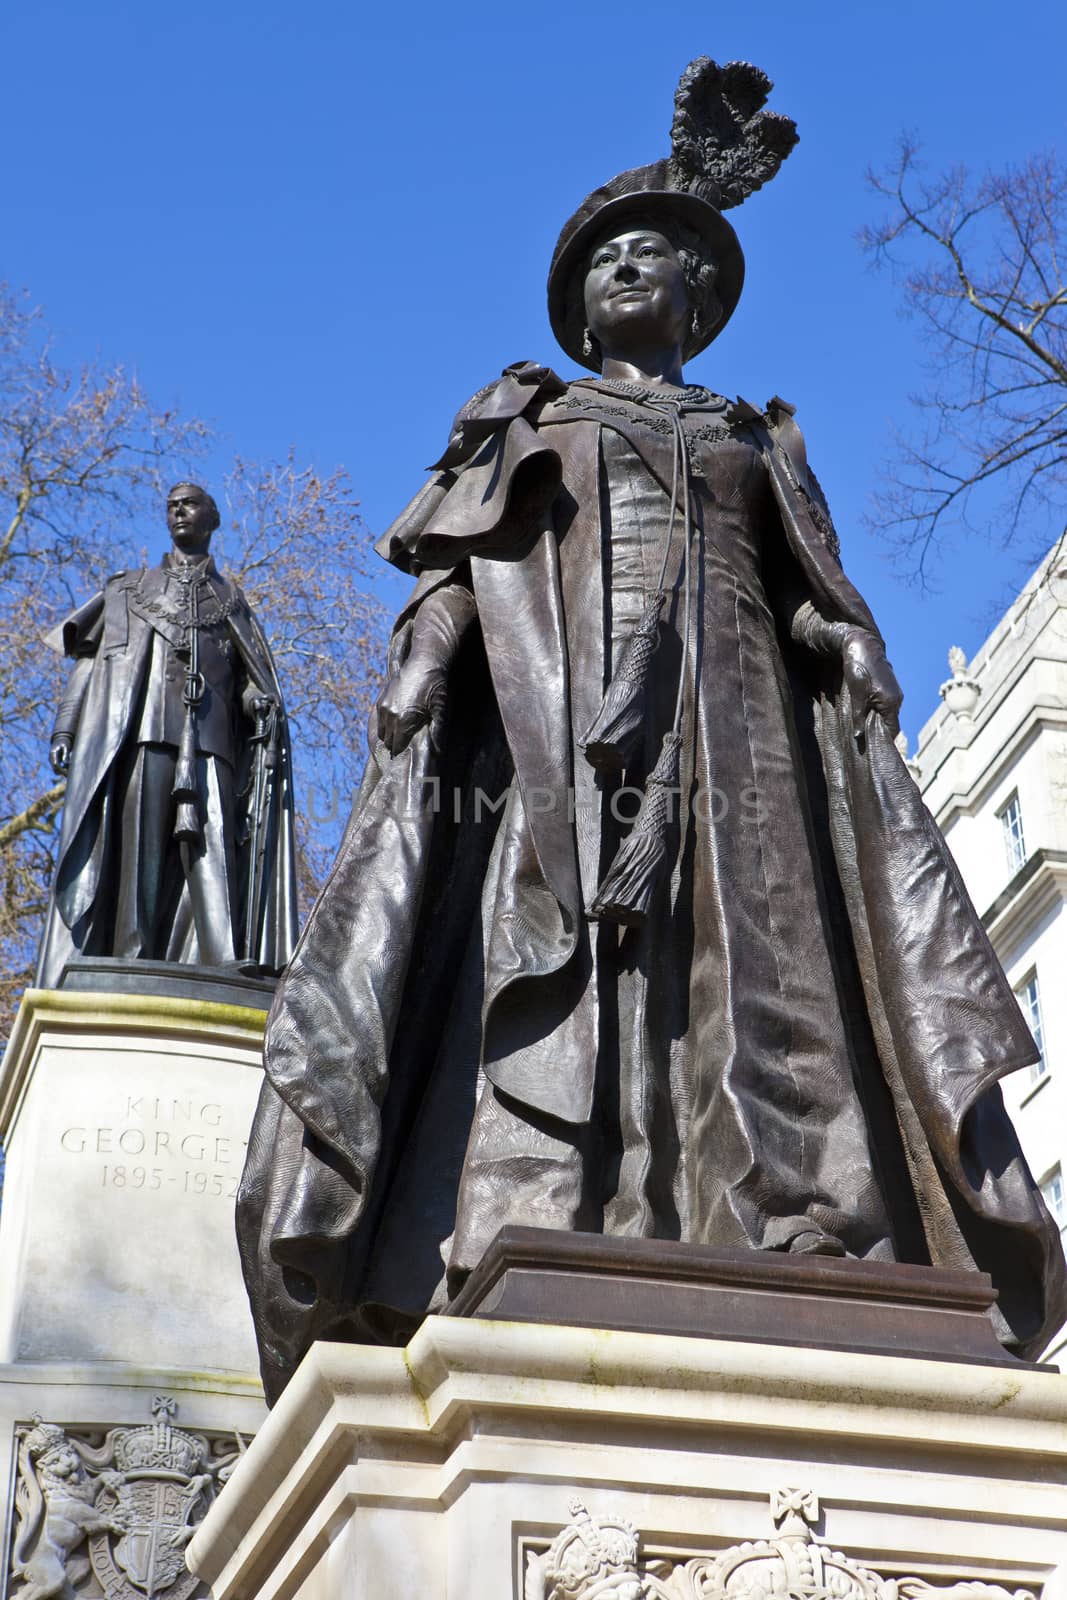 Statues of Elizabeth The Queen Mother and King George IV situated in Carlton Gardens, near The Mall in London.